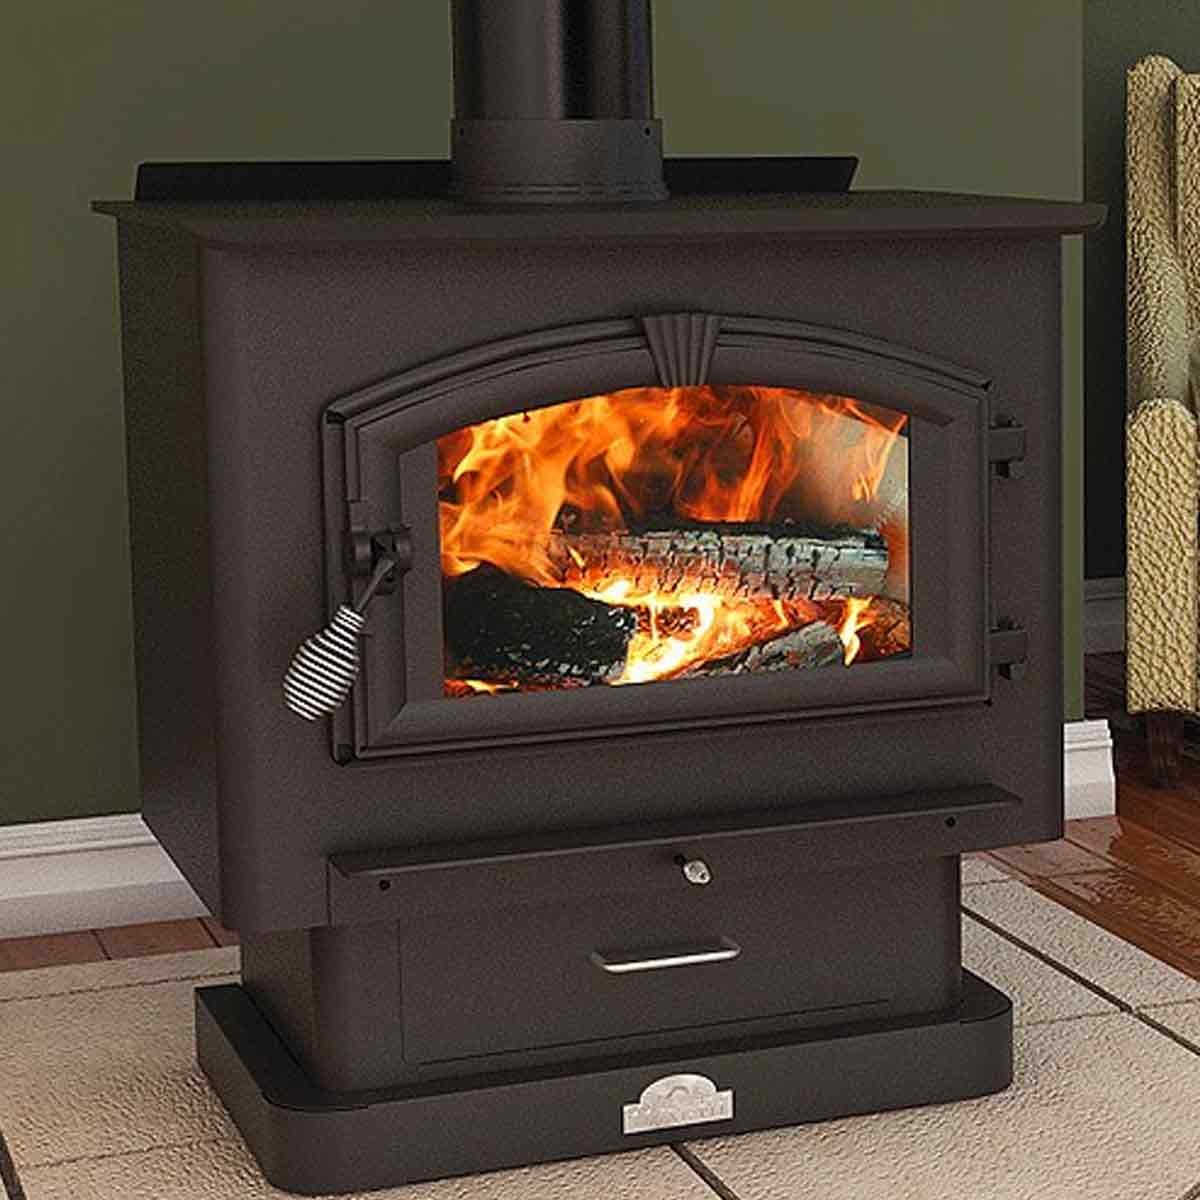 Lennox Fireplace Manual Best Of Wood Burning Fireplaces Mobile Homes Charming Fireplace